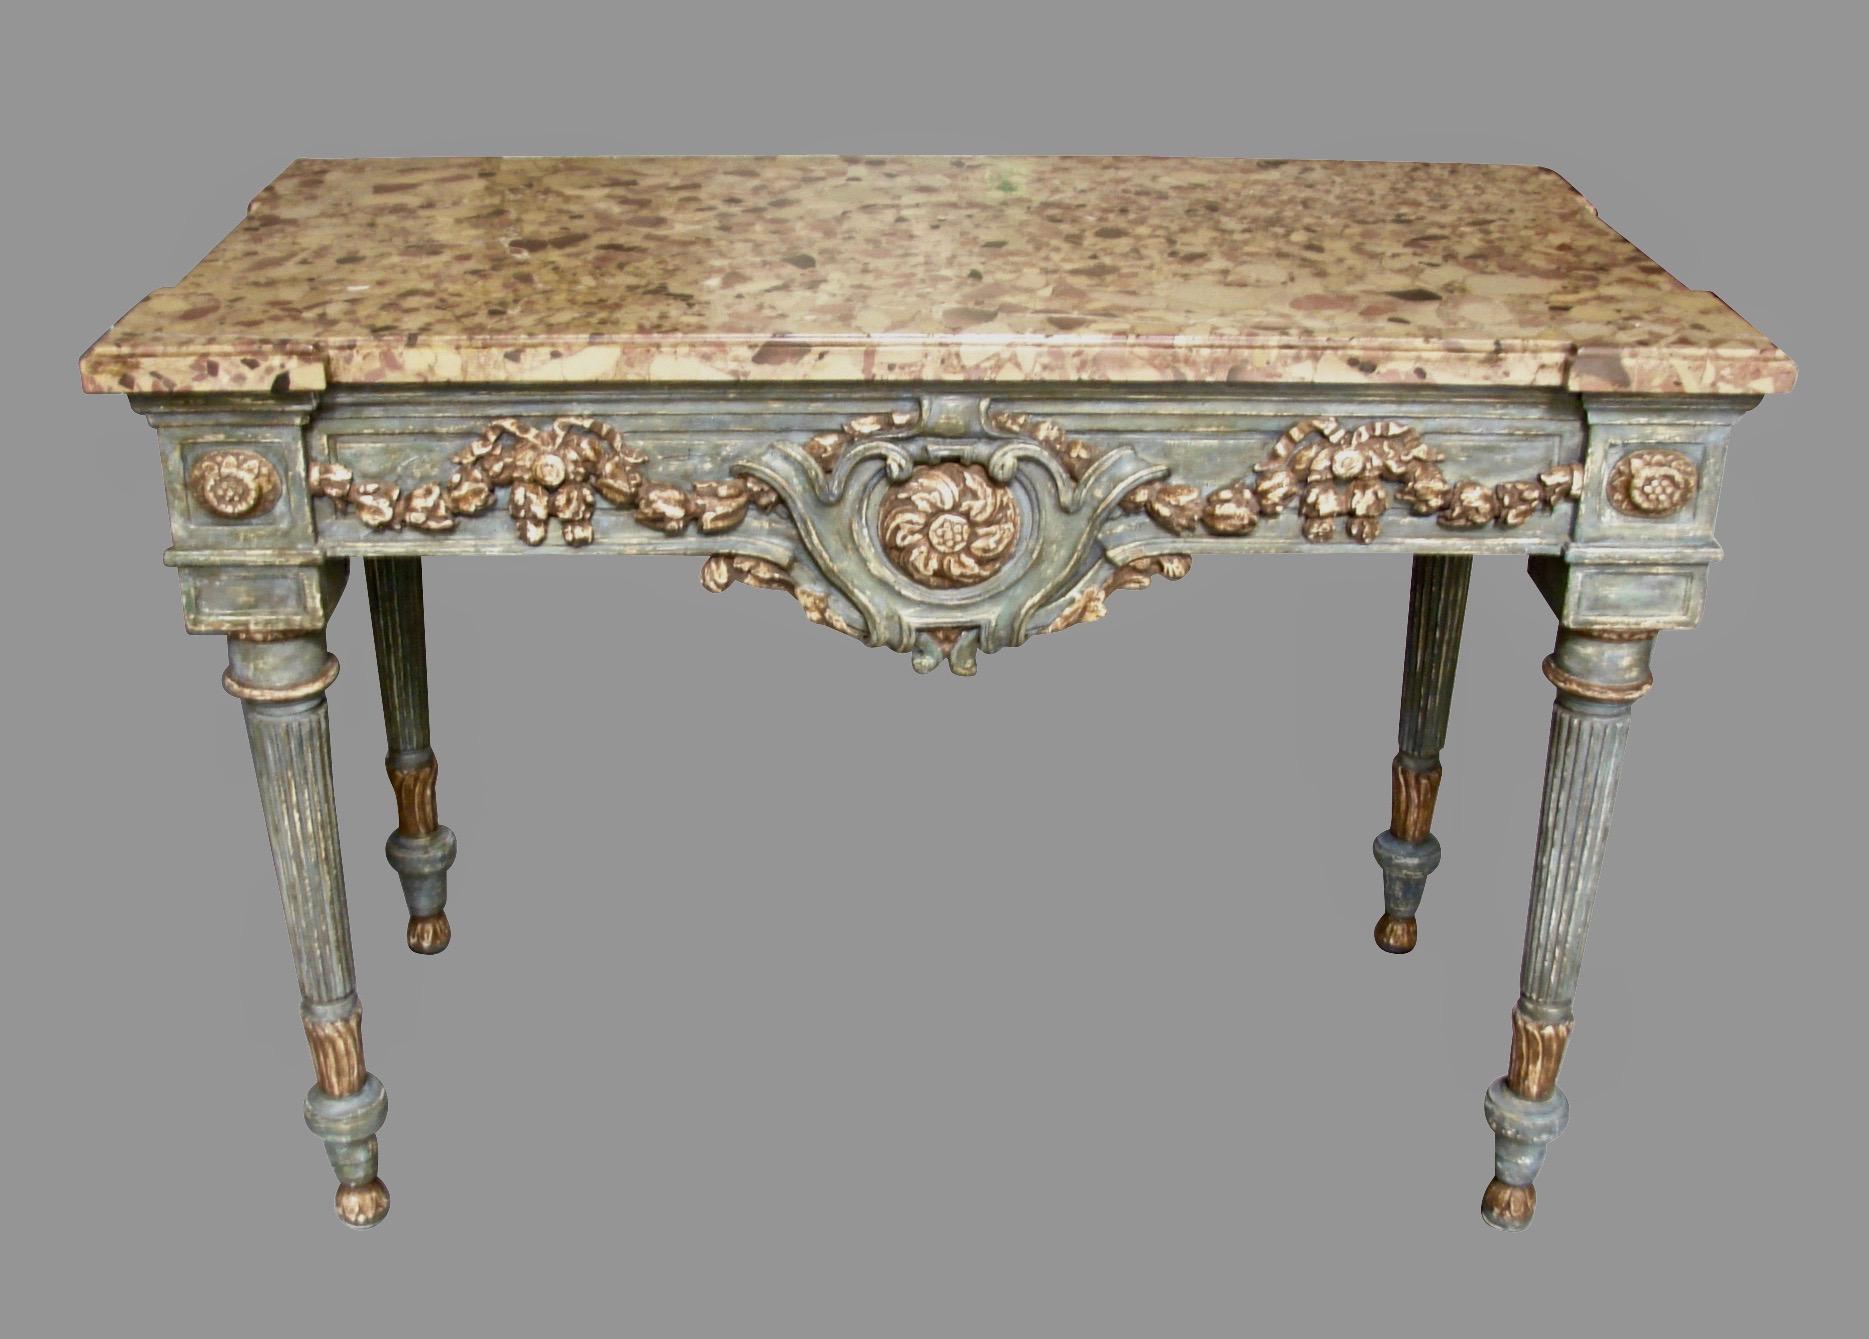 18th Century Italian Neoclassical Cream and Grey Painted Marble Top Console Table